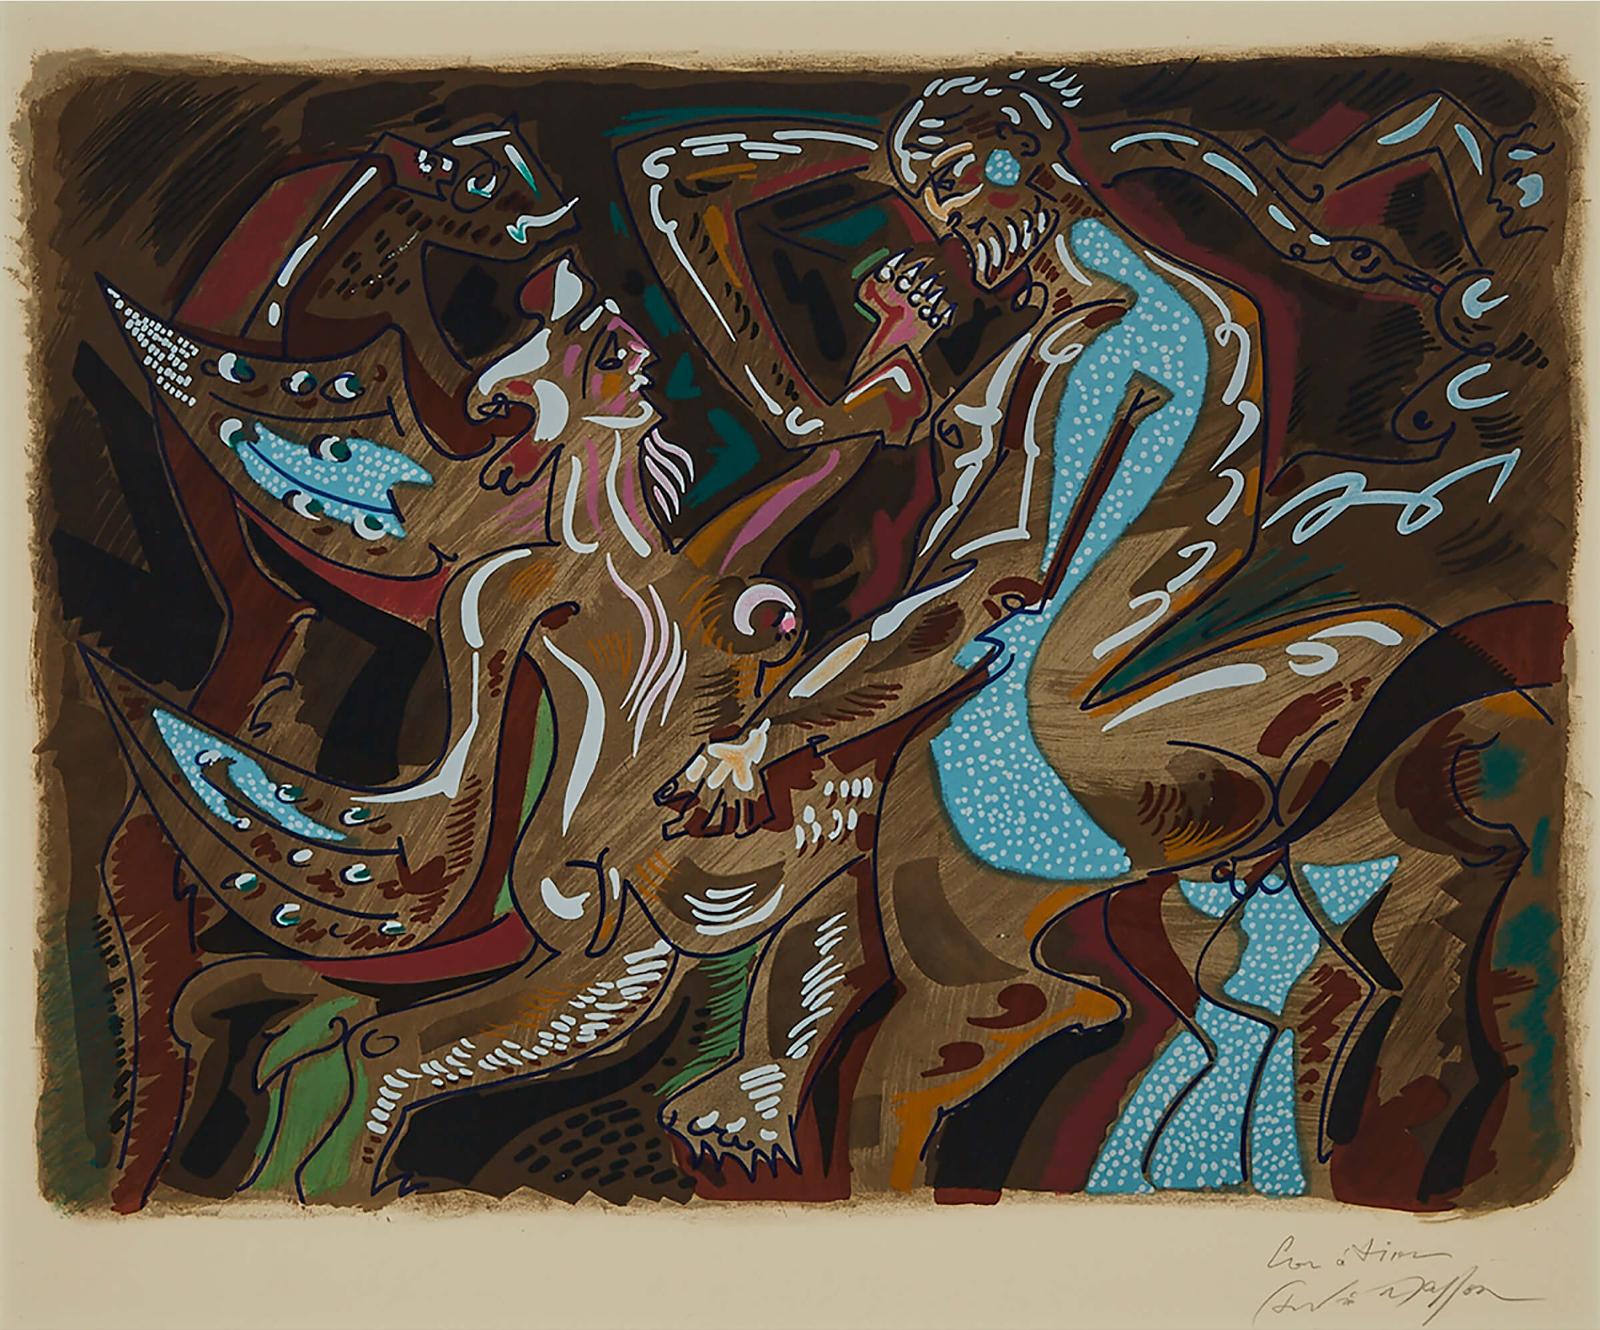 André Masson (1896-1987) - Adam And Eve, 1963